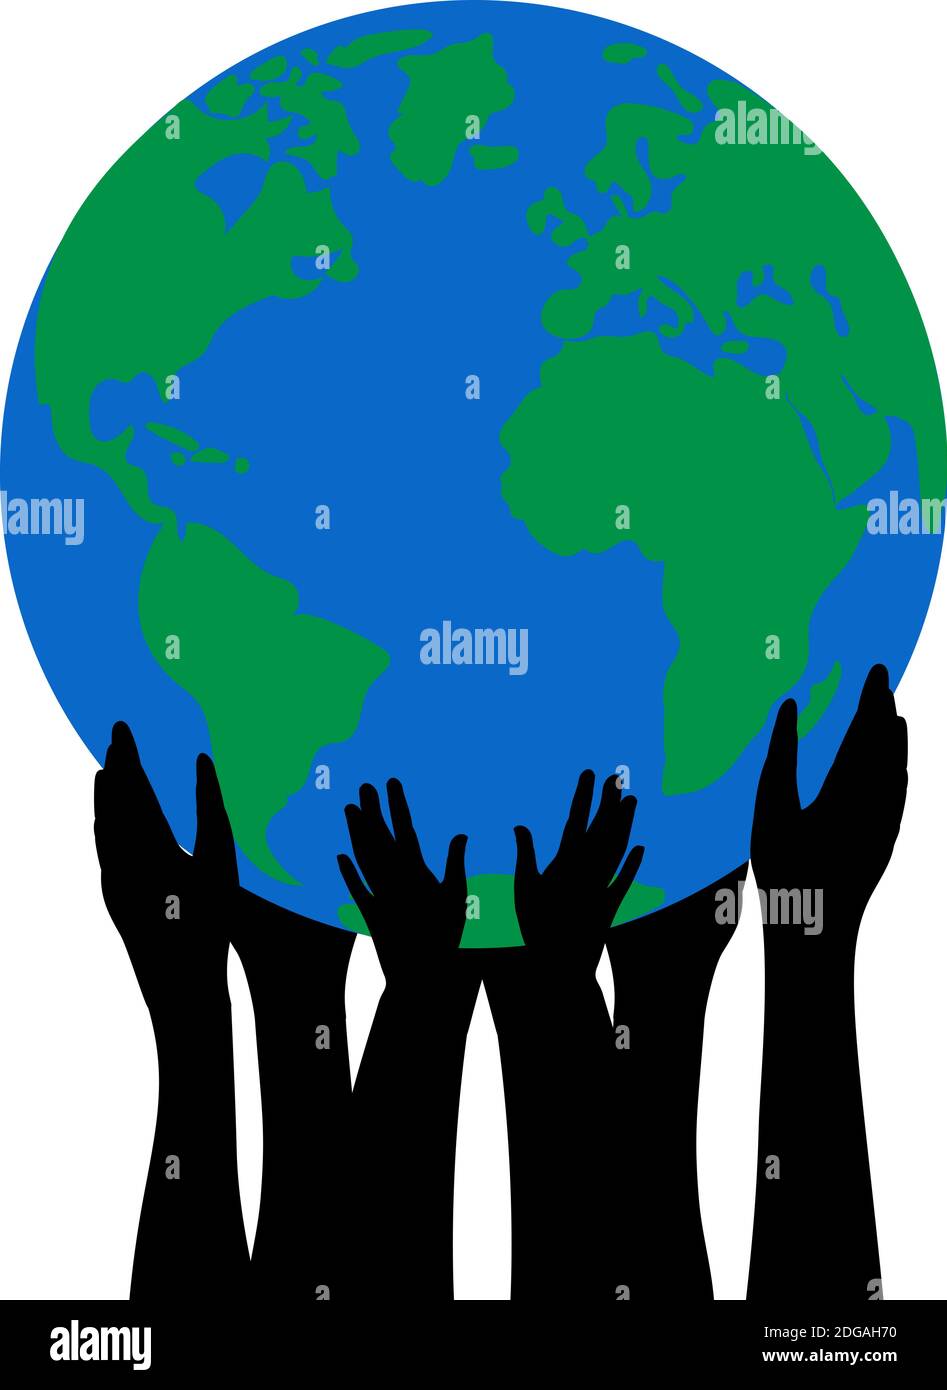 Silhouettes hands people holding the globe. Illustration symbol icon Stock Vector